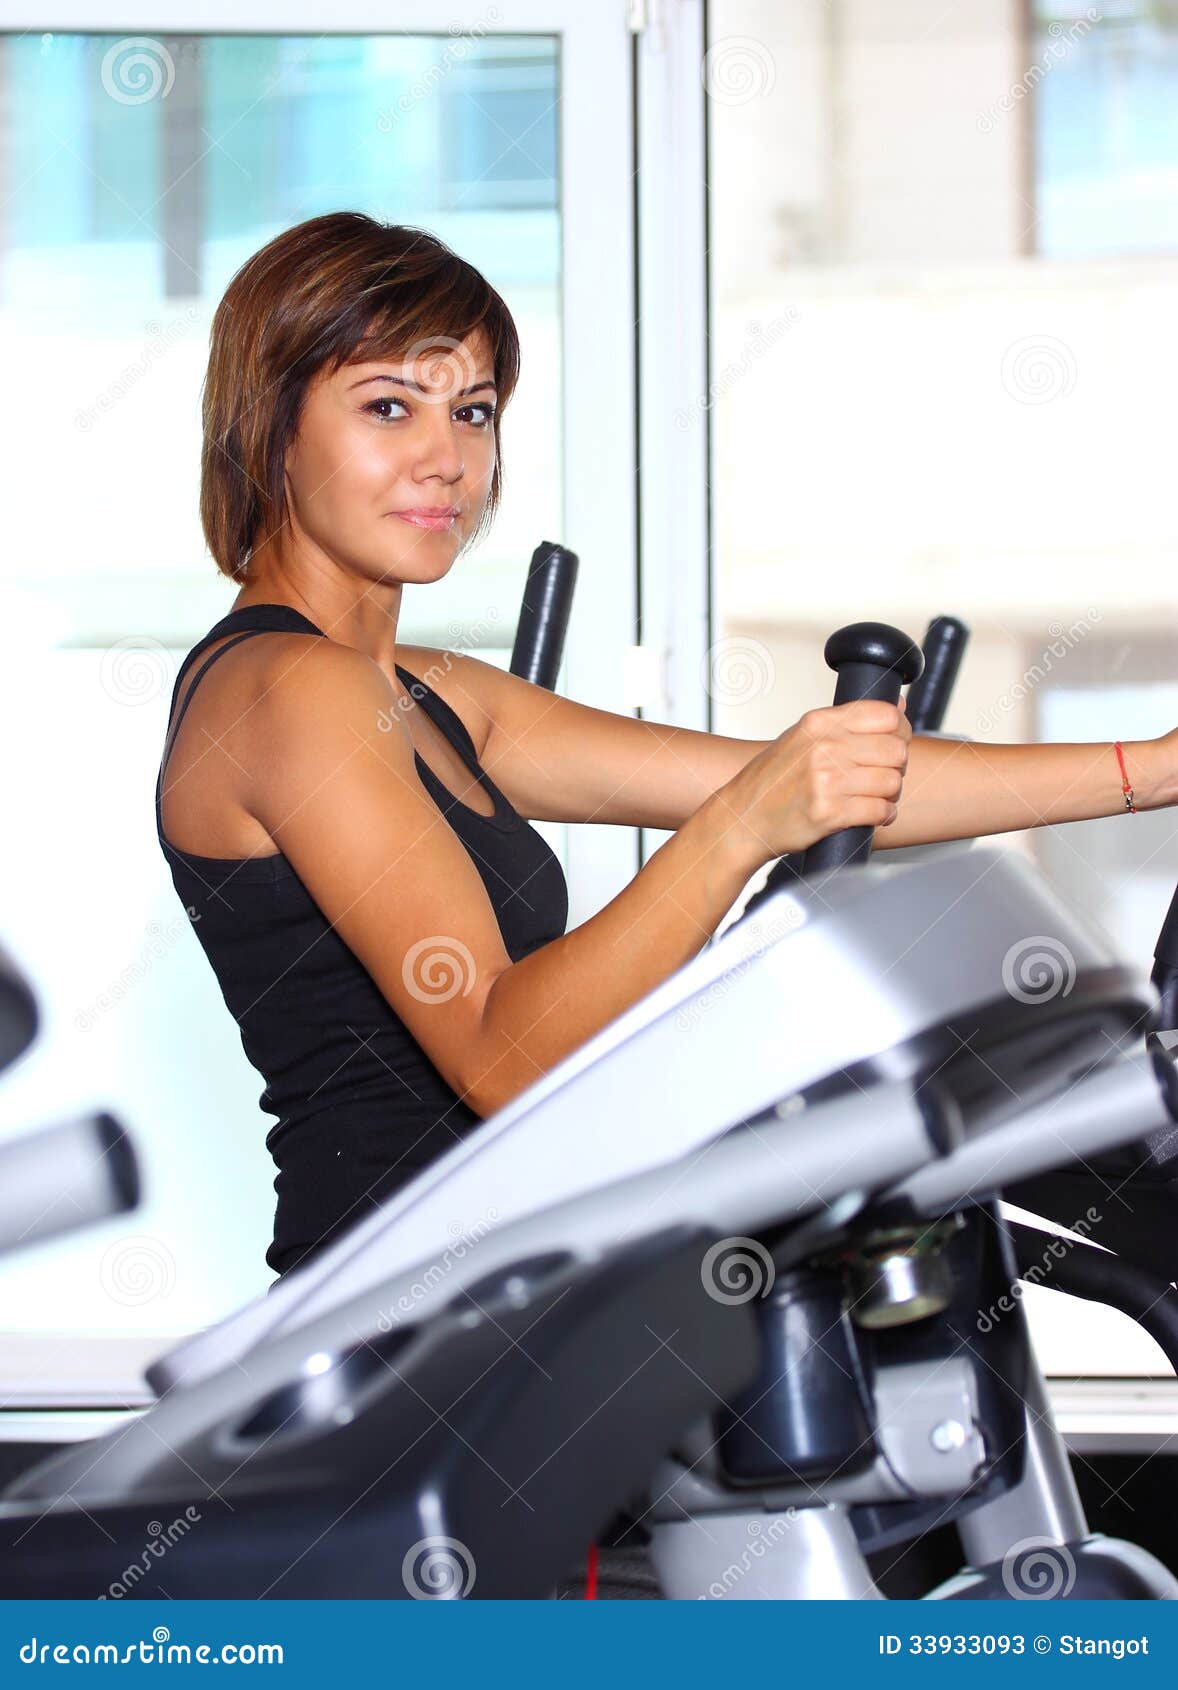 Woman working at the gym stock image. Image of person - 33933093